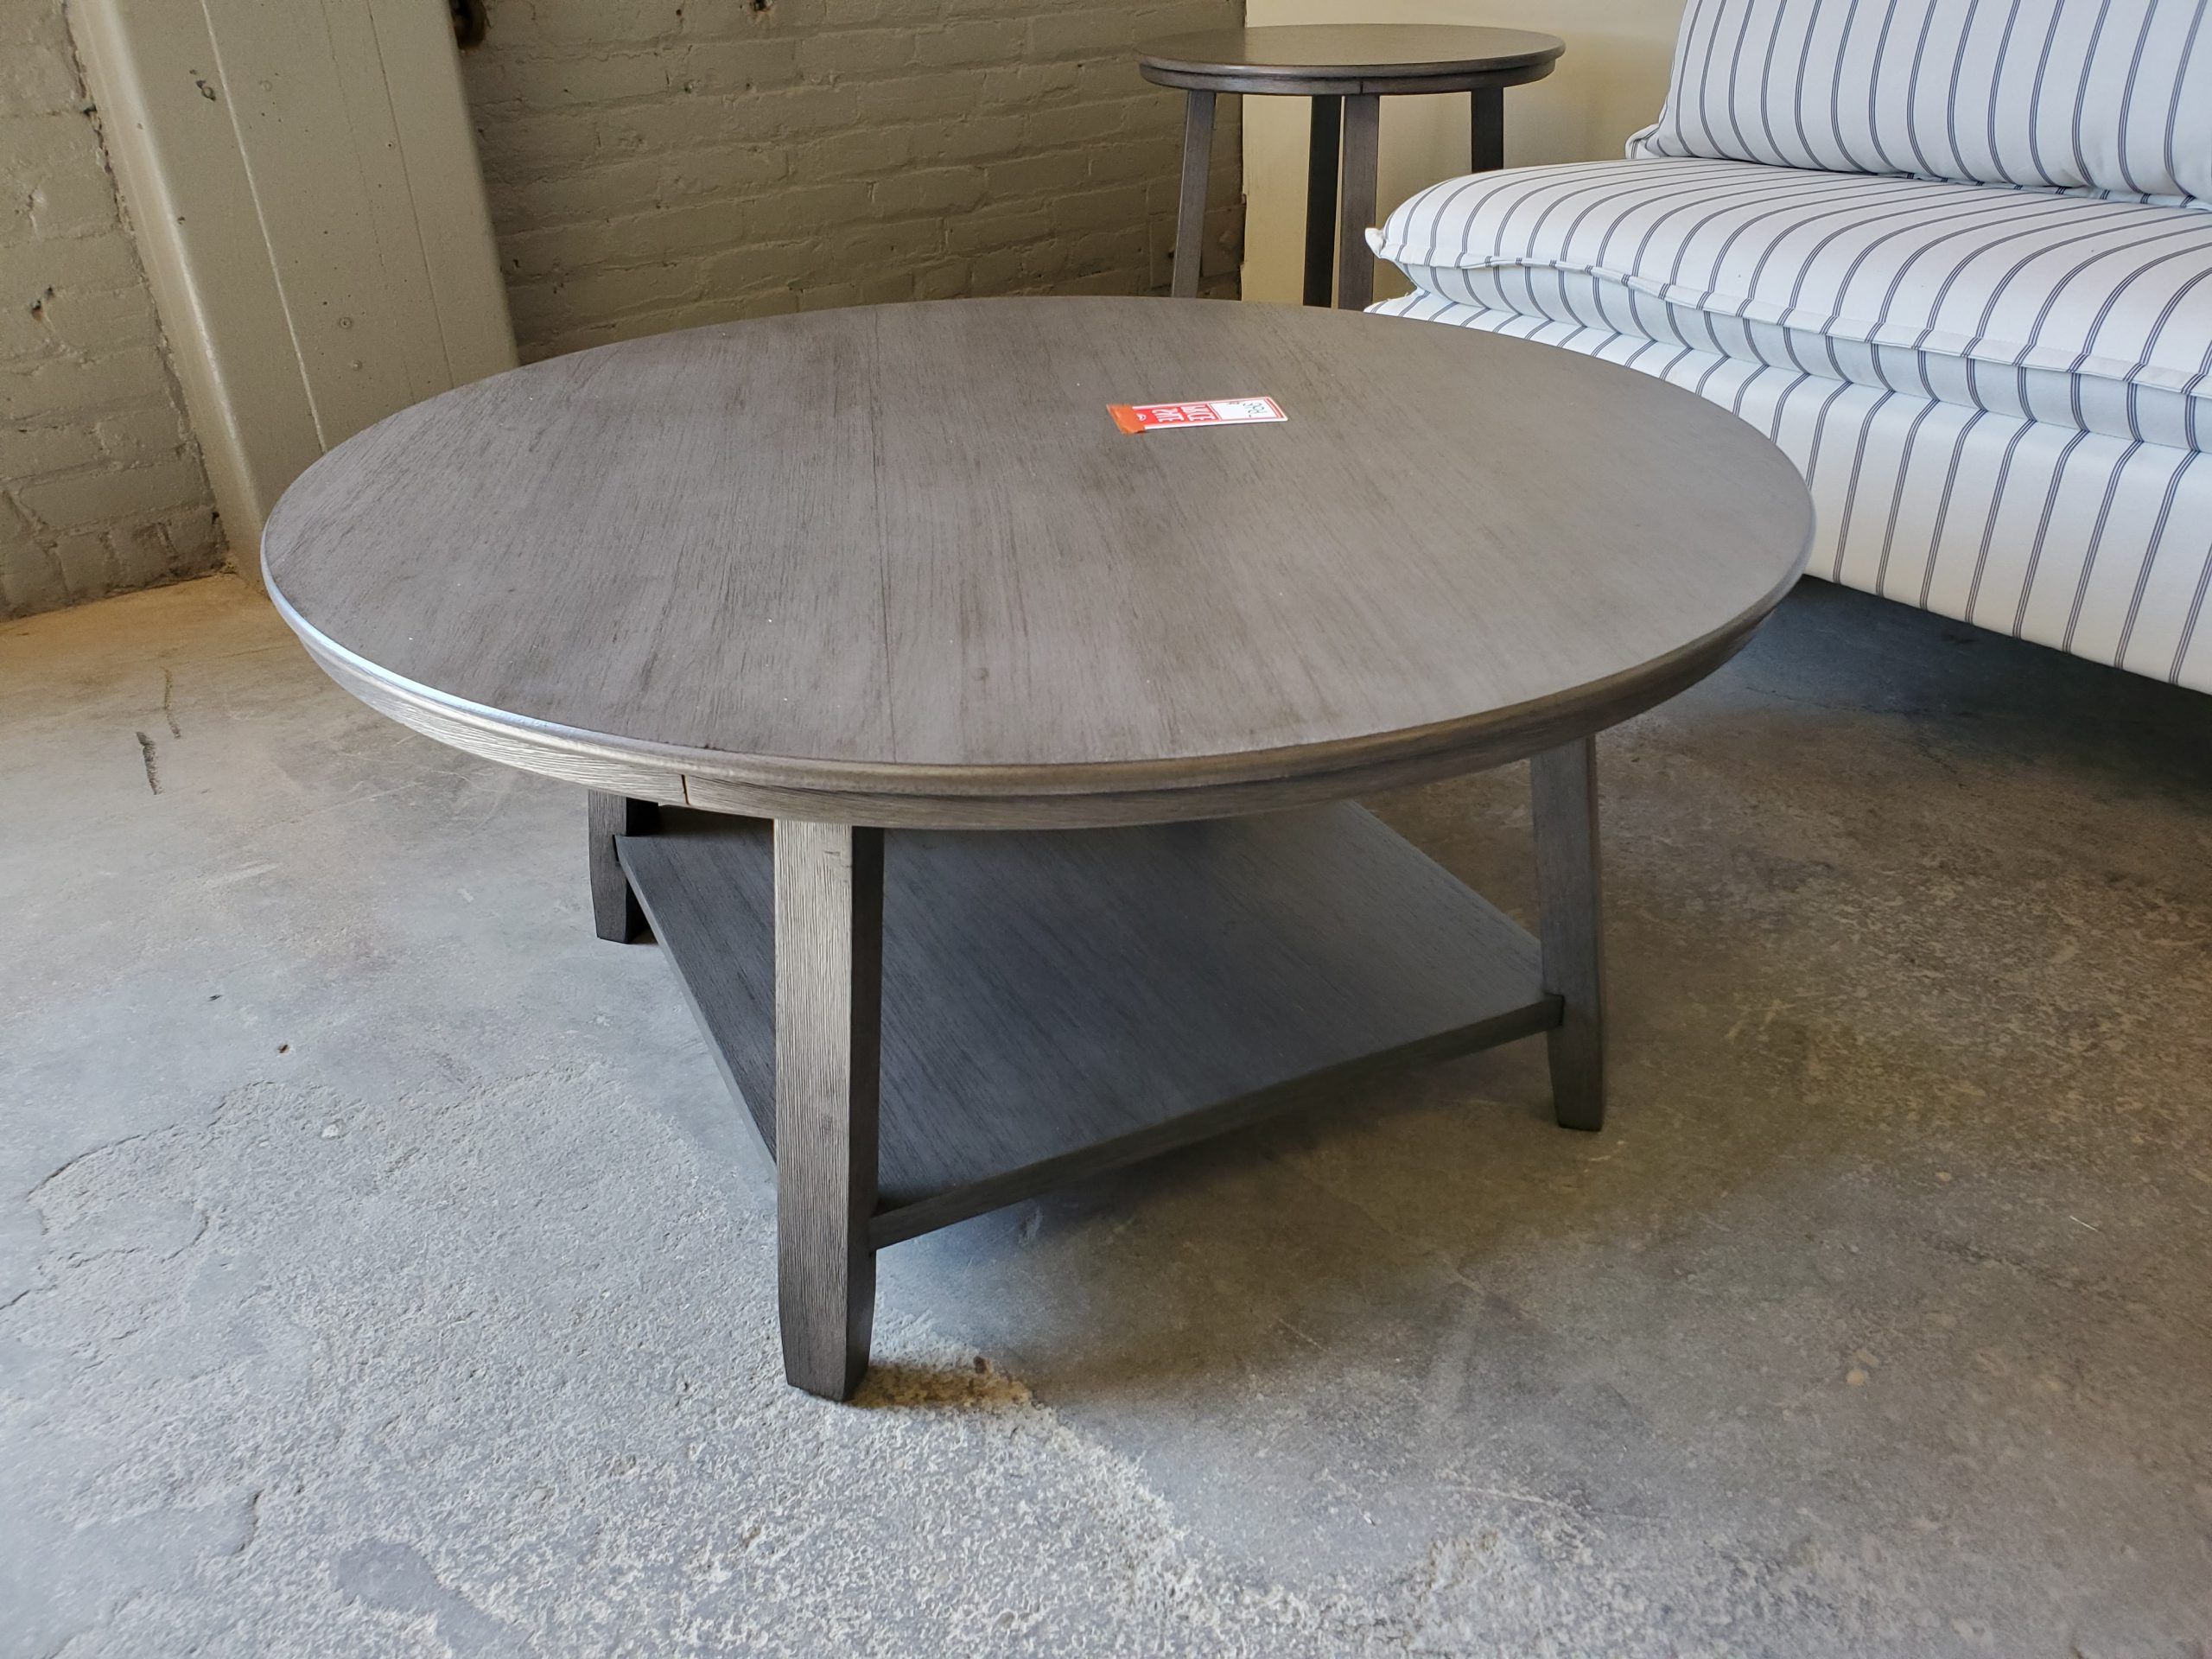 3 Piece Coffee Table Set Furniture, Occasional Table Sets In Newest 3 Piece Coffee Tables (Gallery 12 of 20)